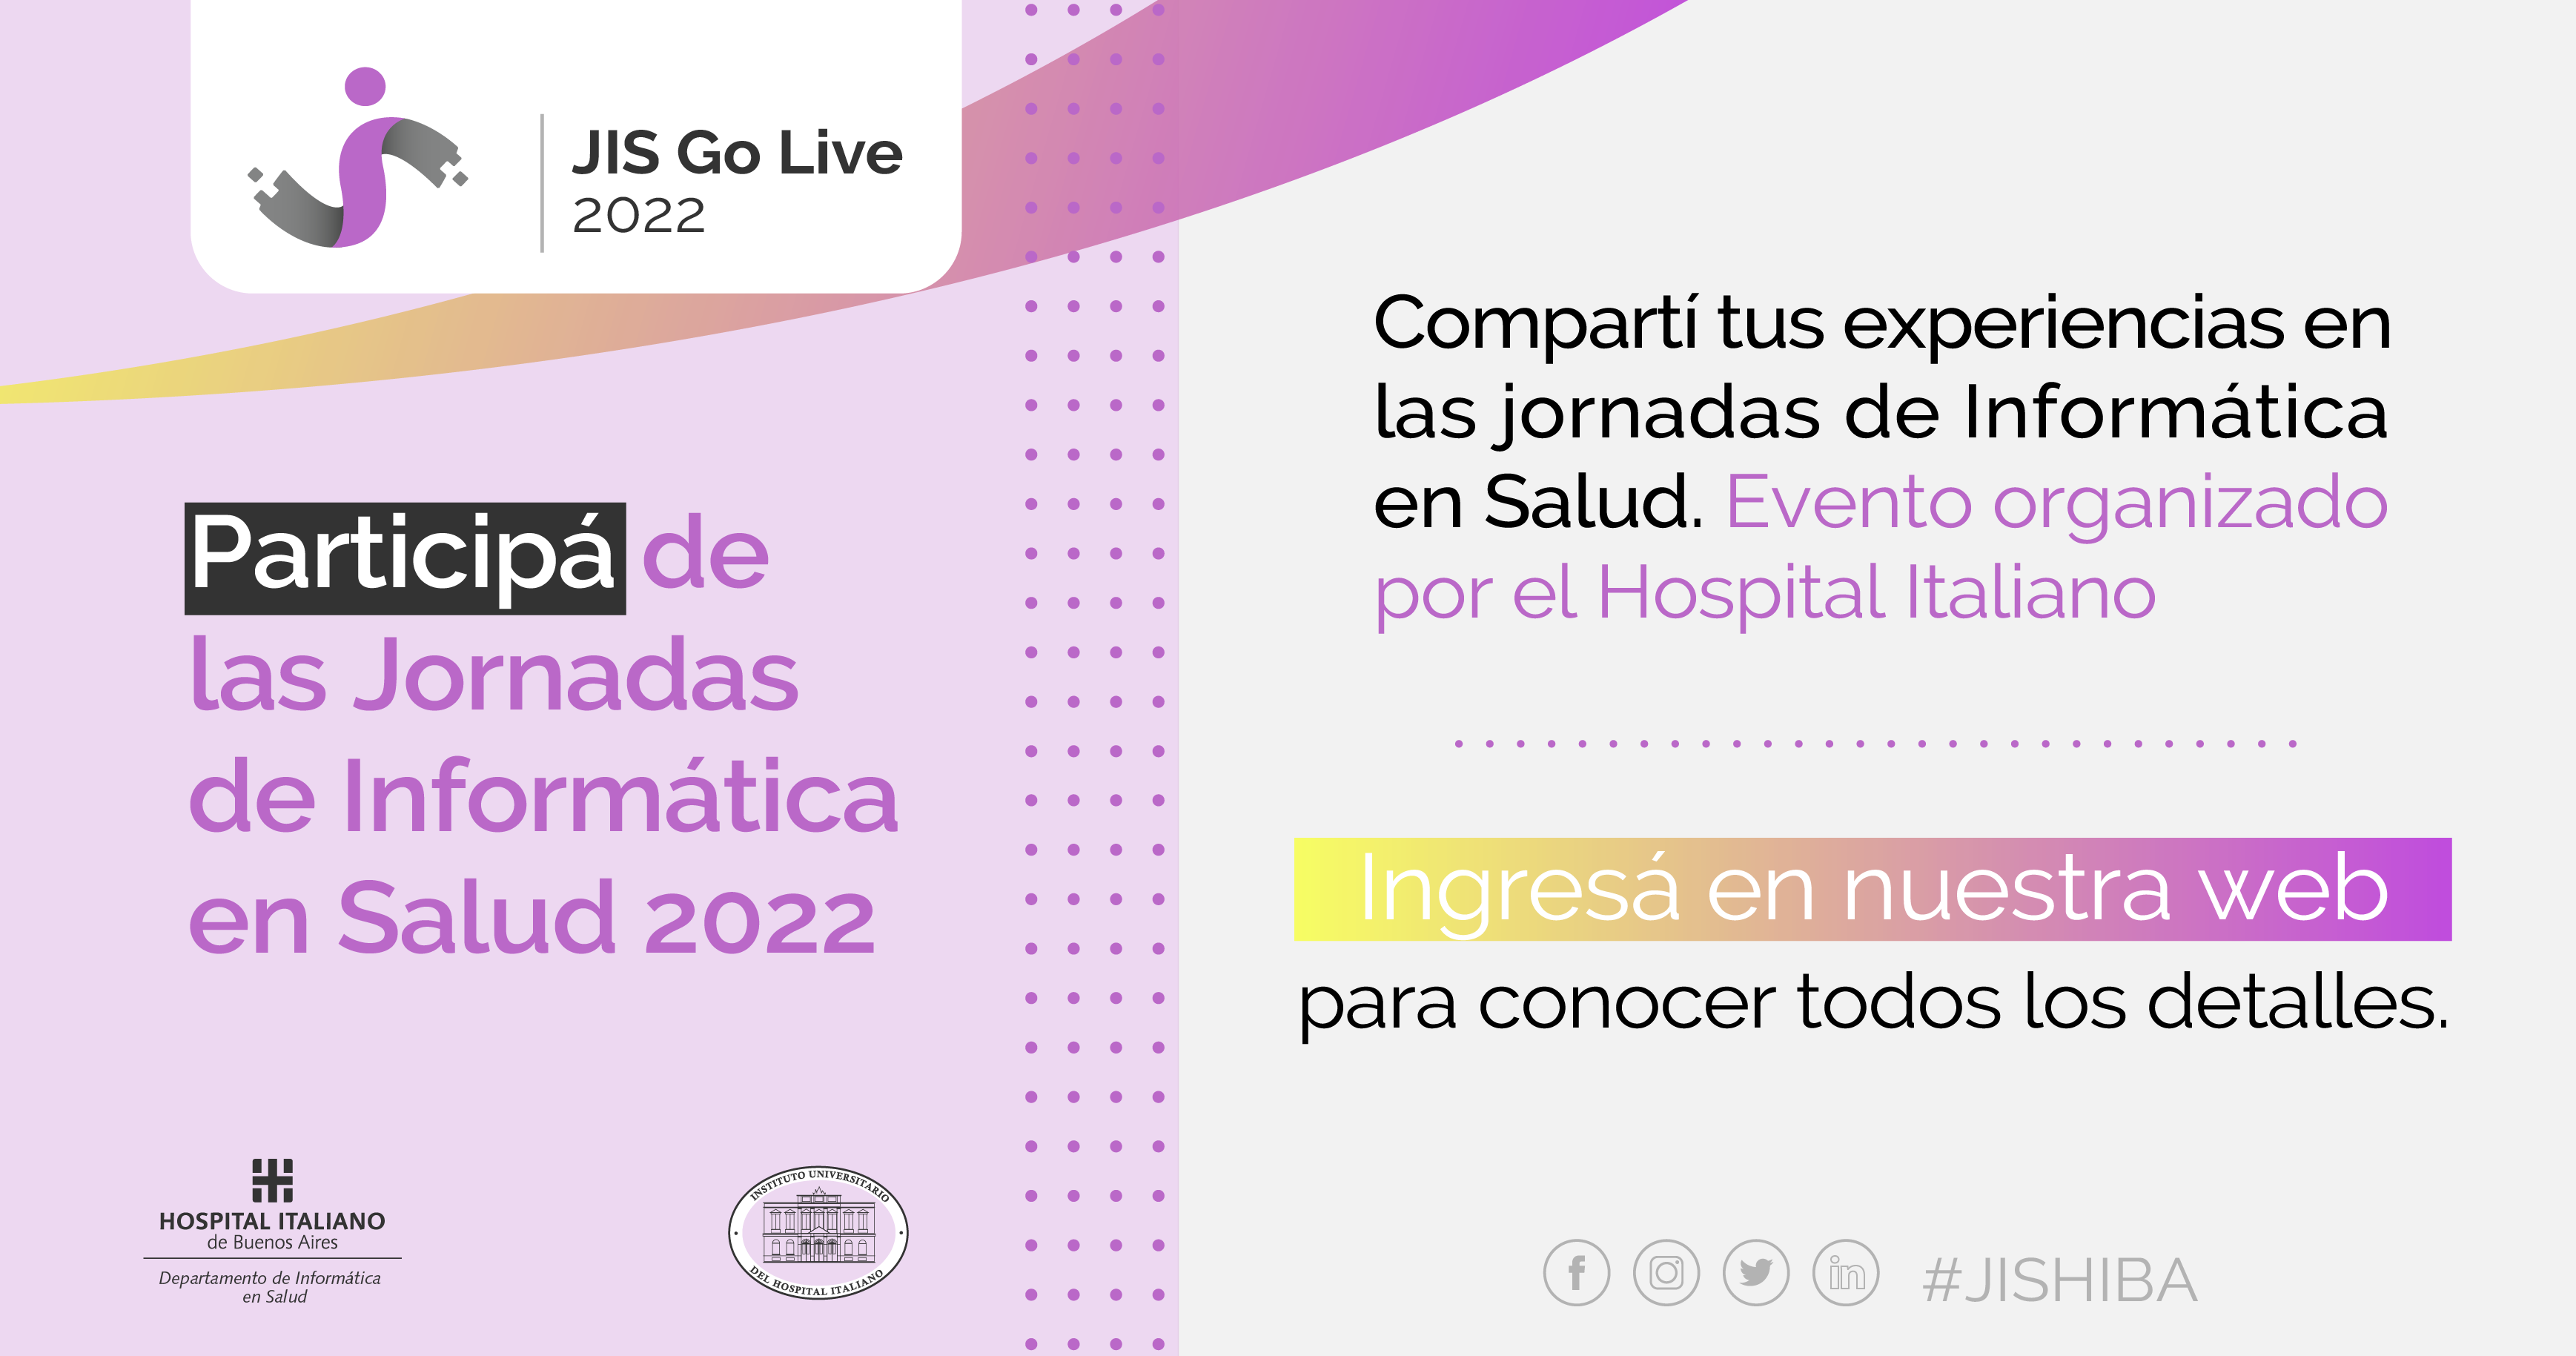 JIS Go Live 2022, a unique experience, free in a hybrid format - #BHHMembersInitiatives